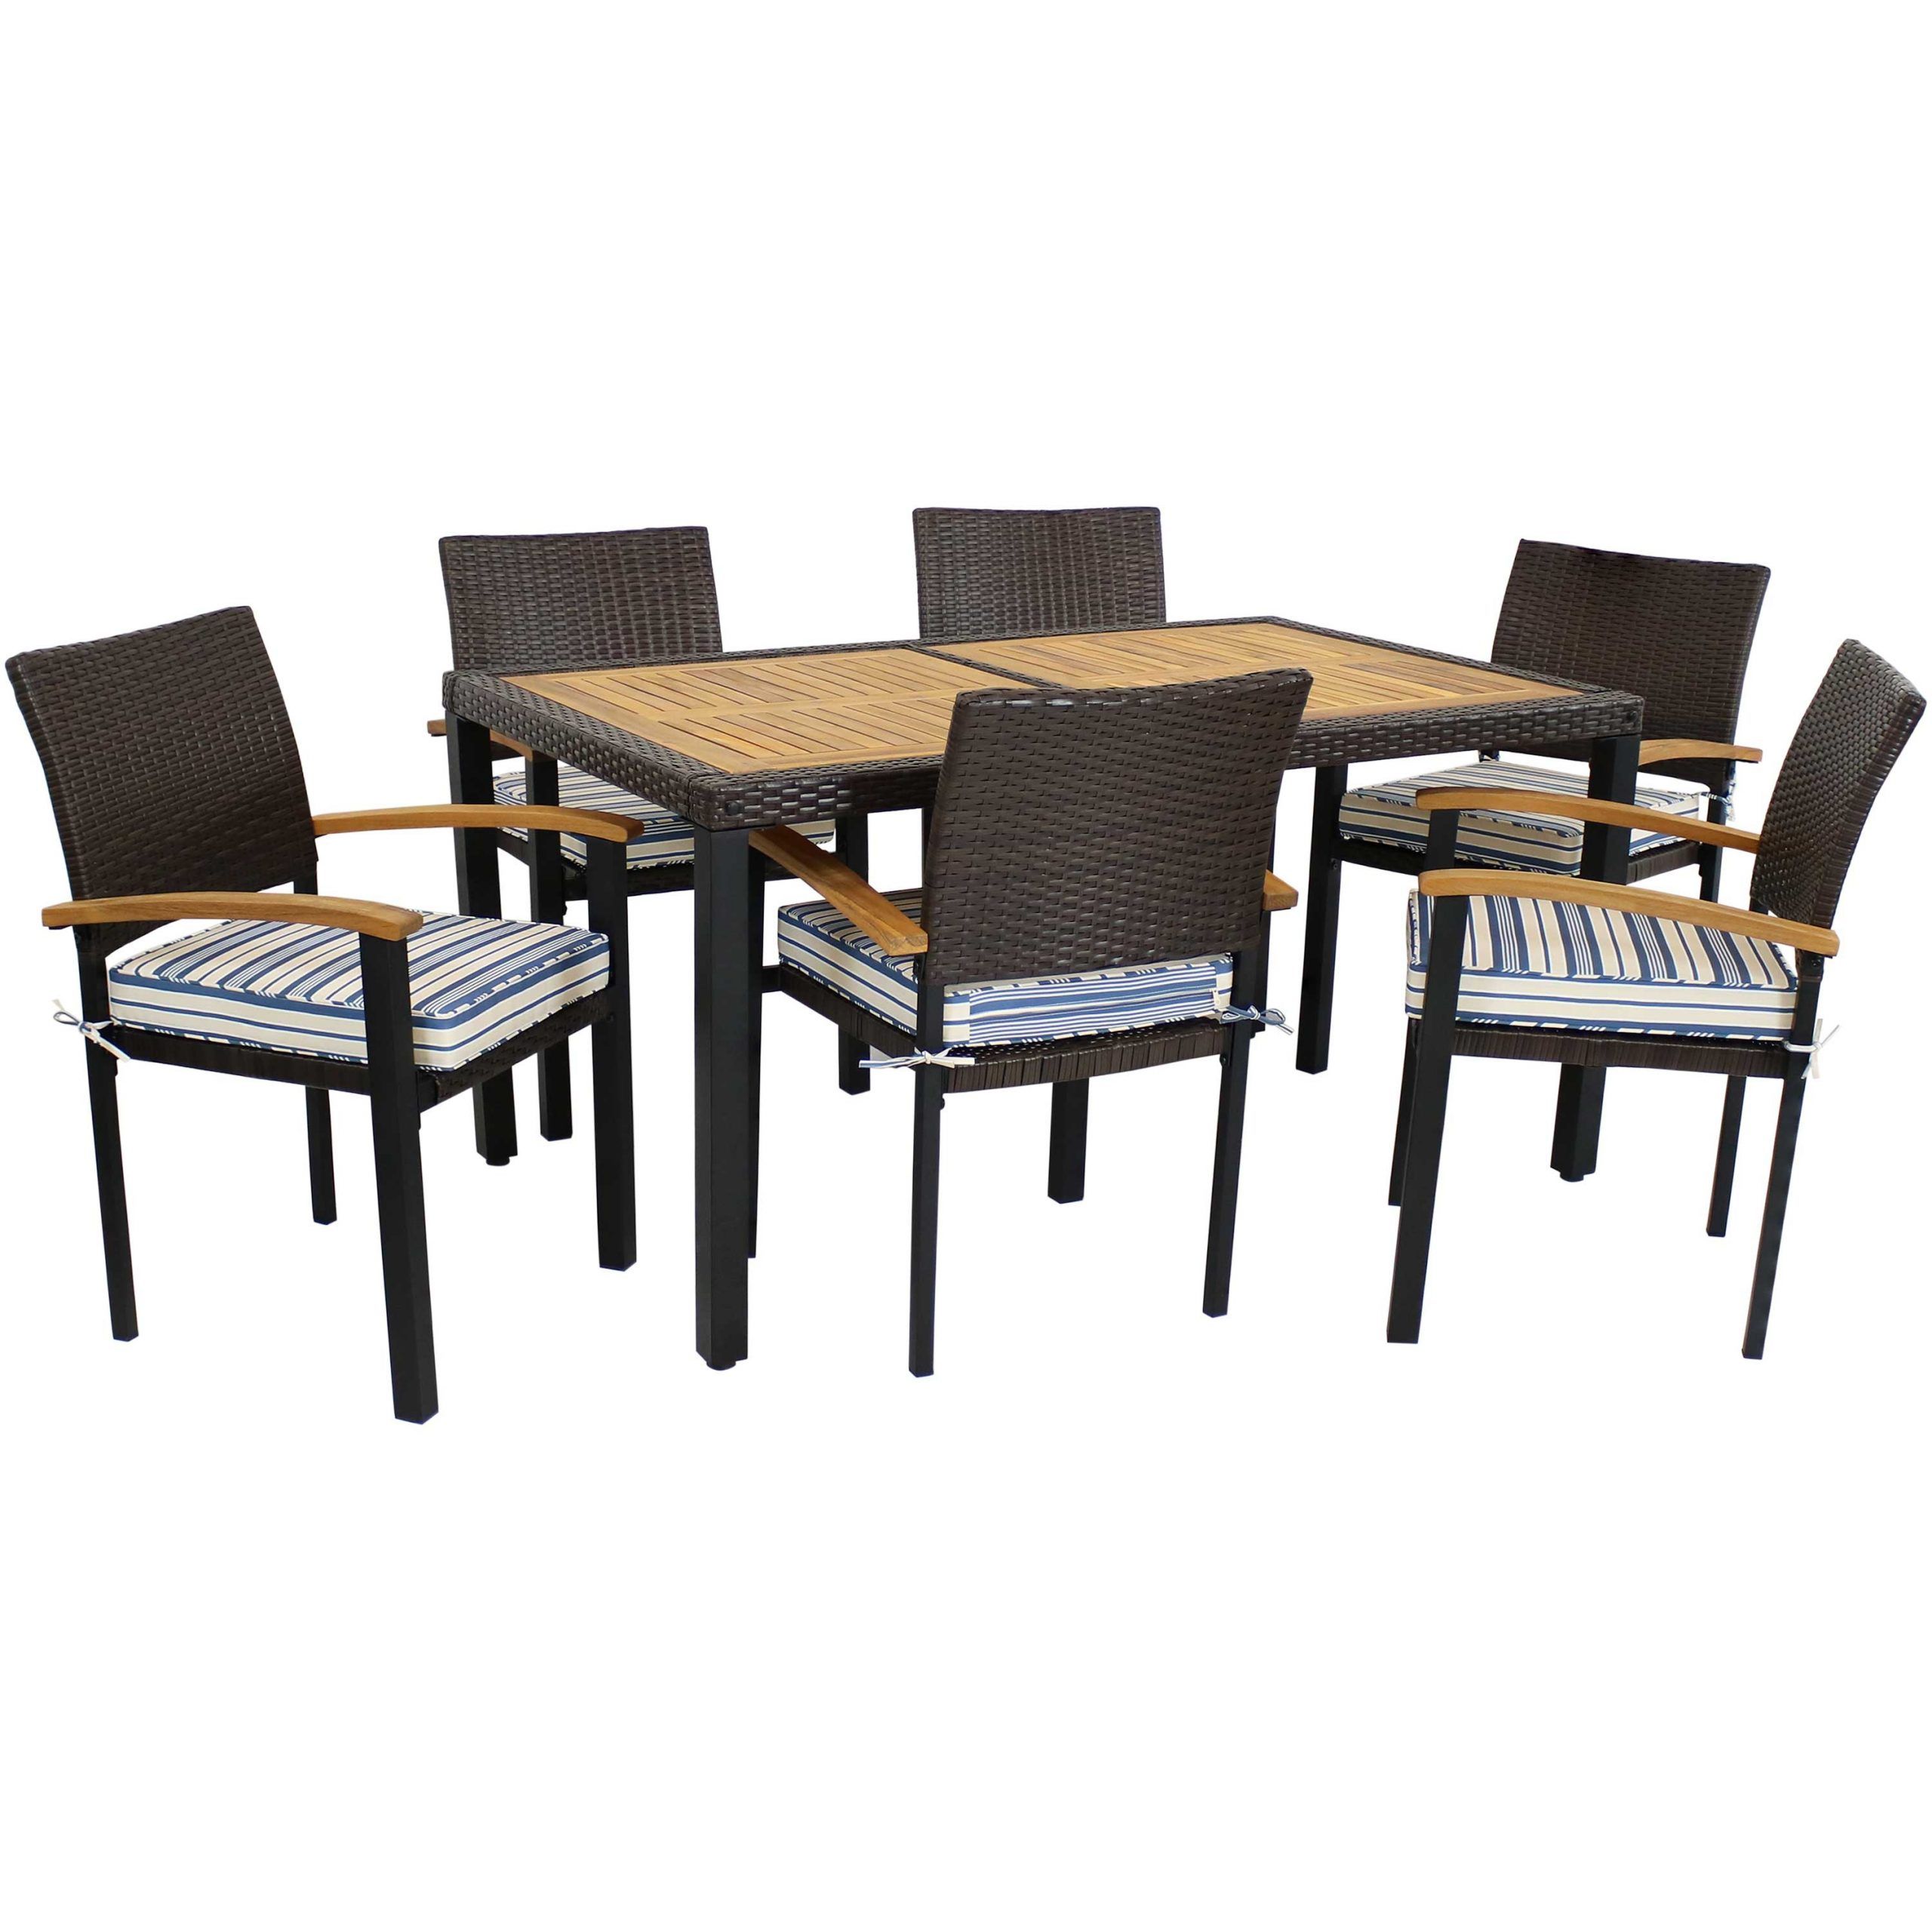 Carlow 7 Piece Rattan And Acacia Patio Dining Set – Dark Brown/Blue For Blue And Brown Wicker Outdoor Patio Sets (View 15 of 15)